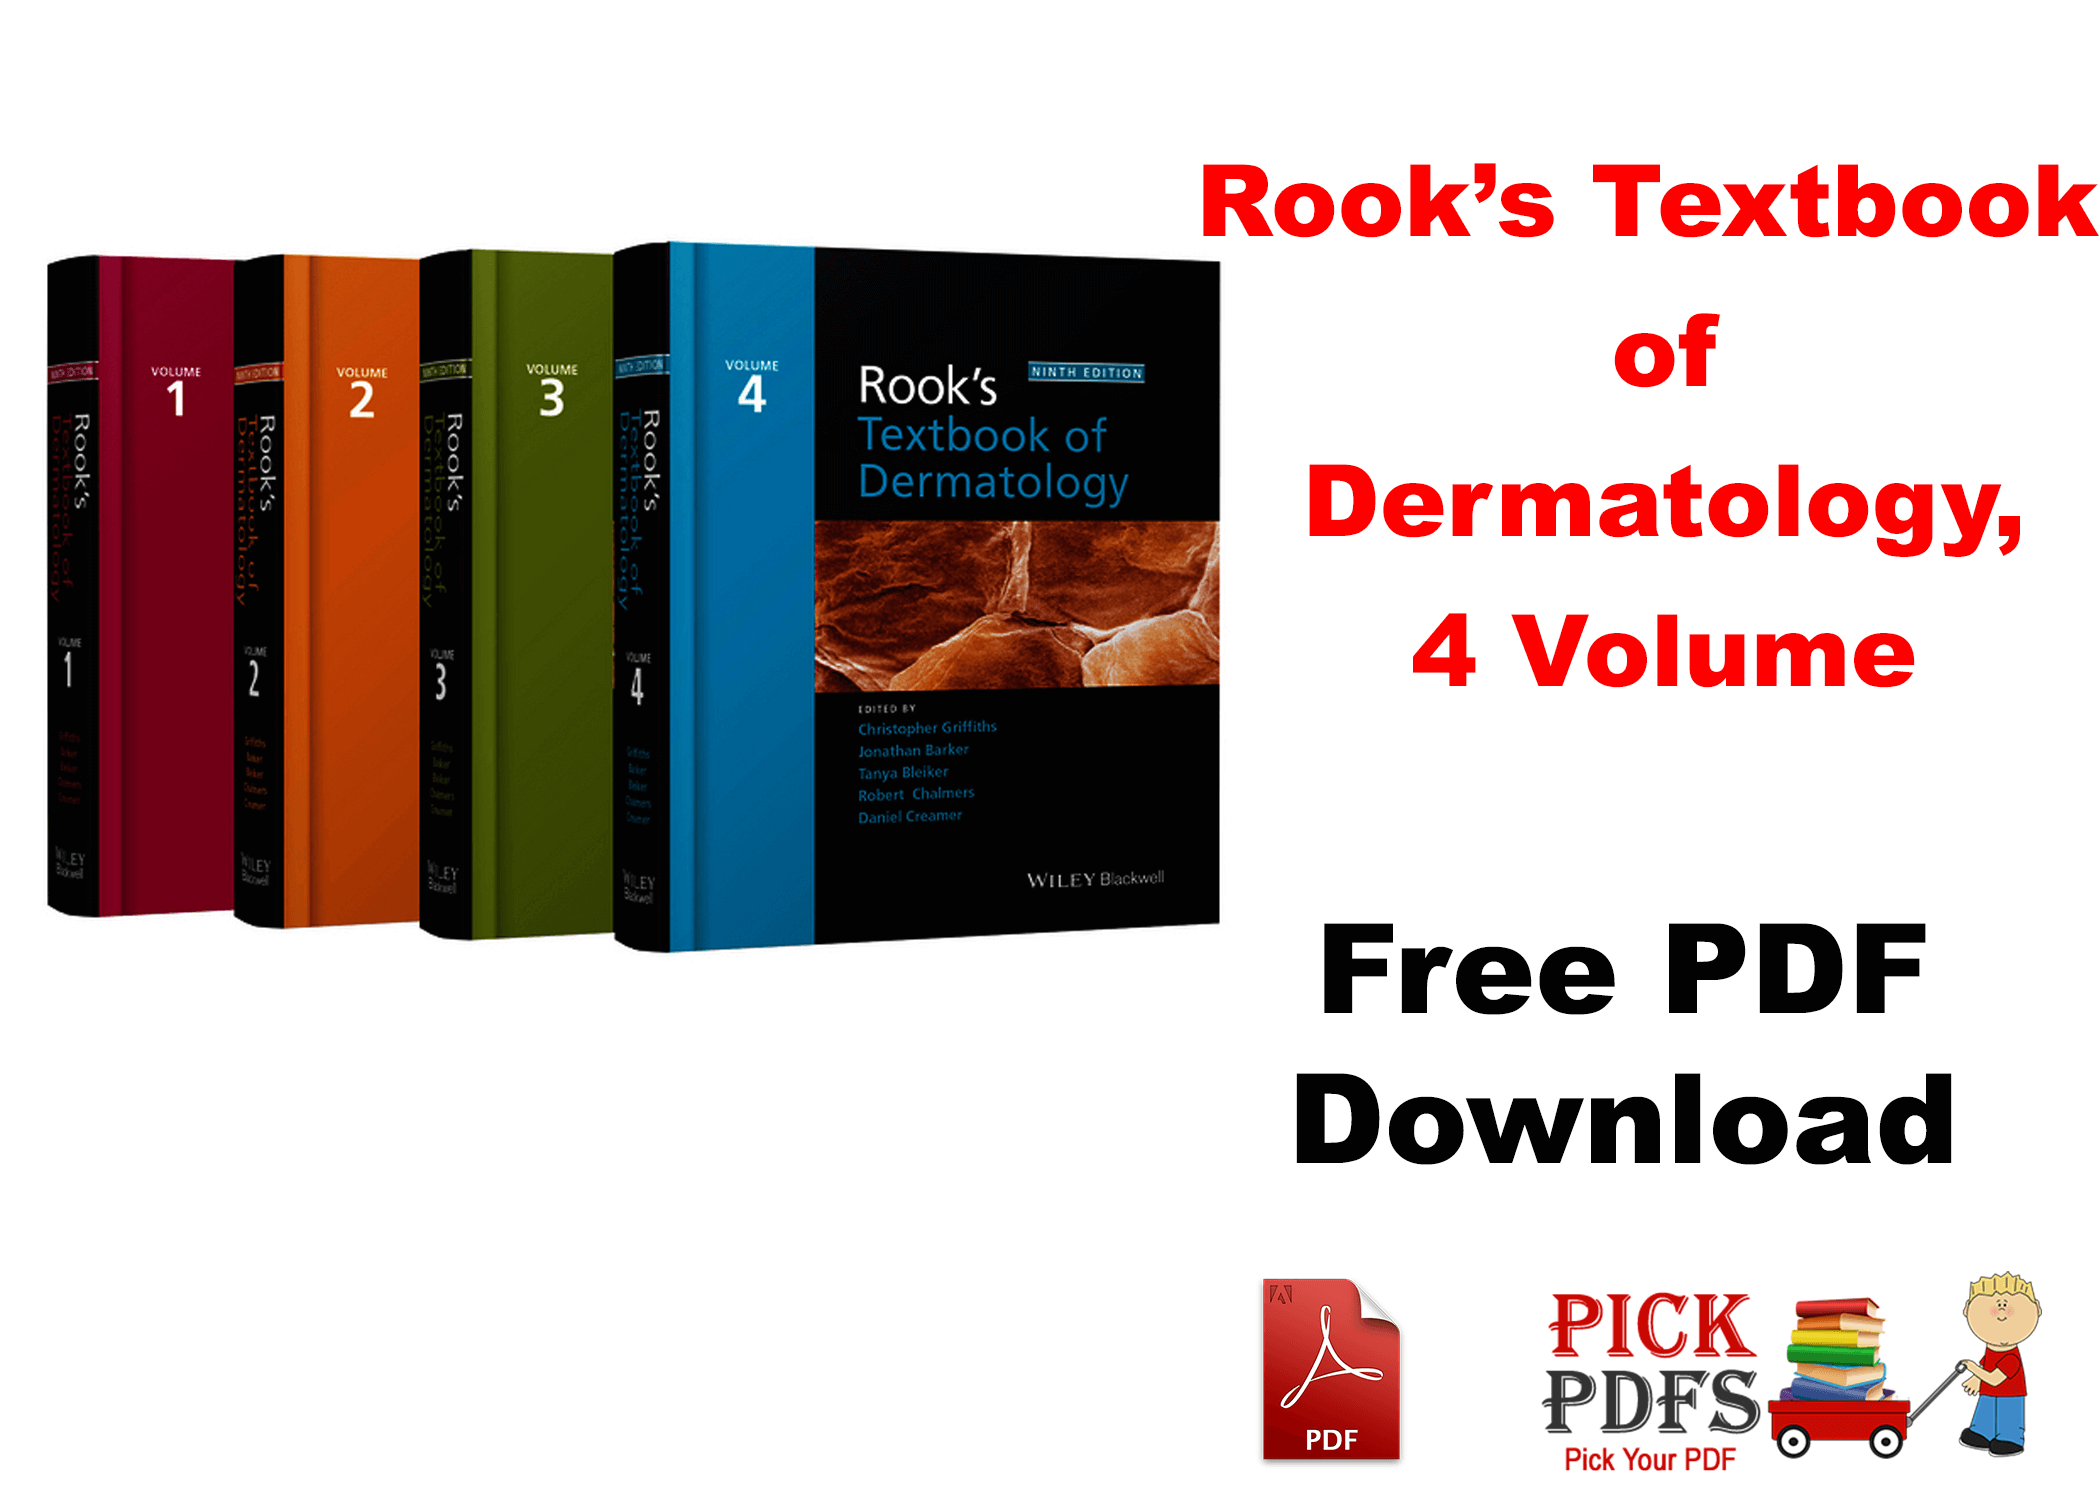 https://pickpdfs.com/free-pdf-download-abc-of-clinical-haematology/